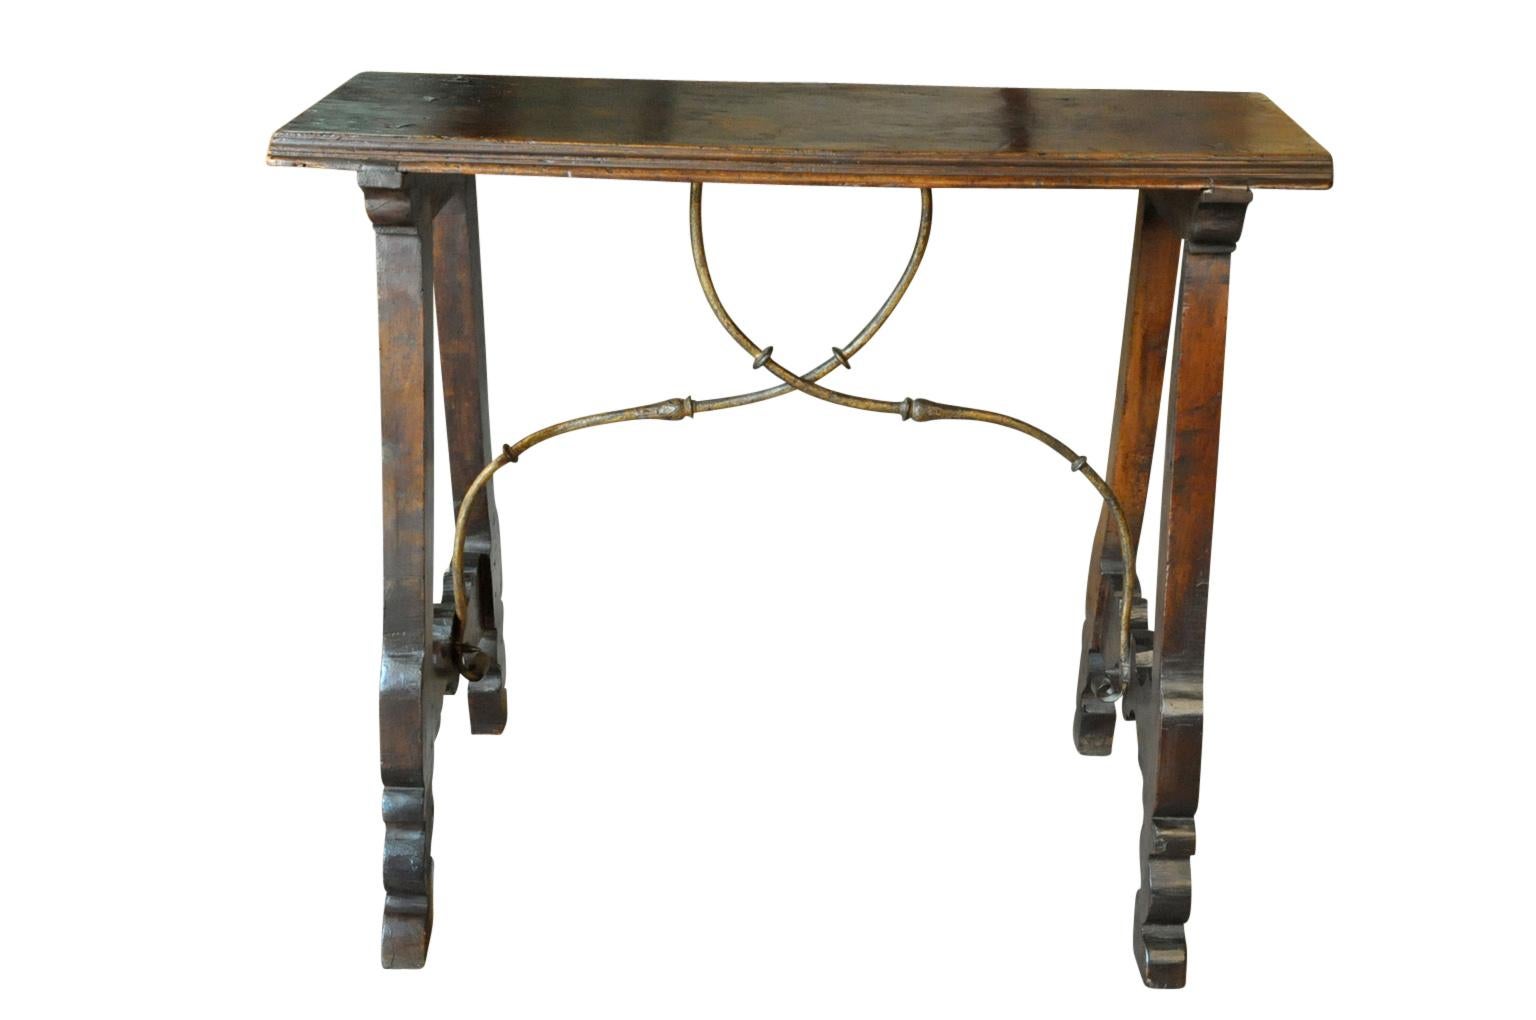 A very handsome 18th century console table from the Catalan region of Spain. Beautifully constructed from walnut and hand forged iron stretchers. A very desirable diminutive size.